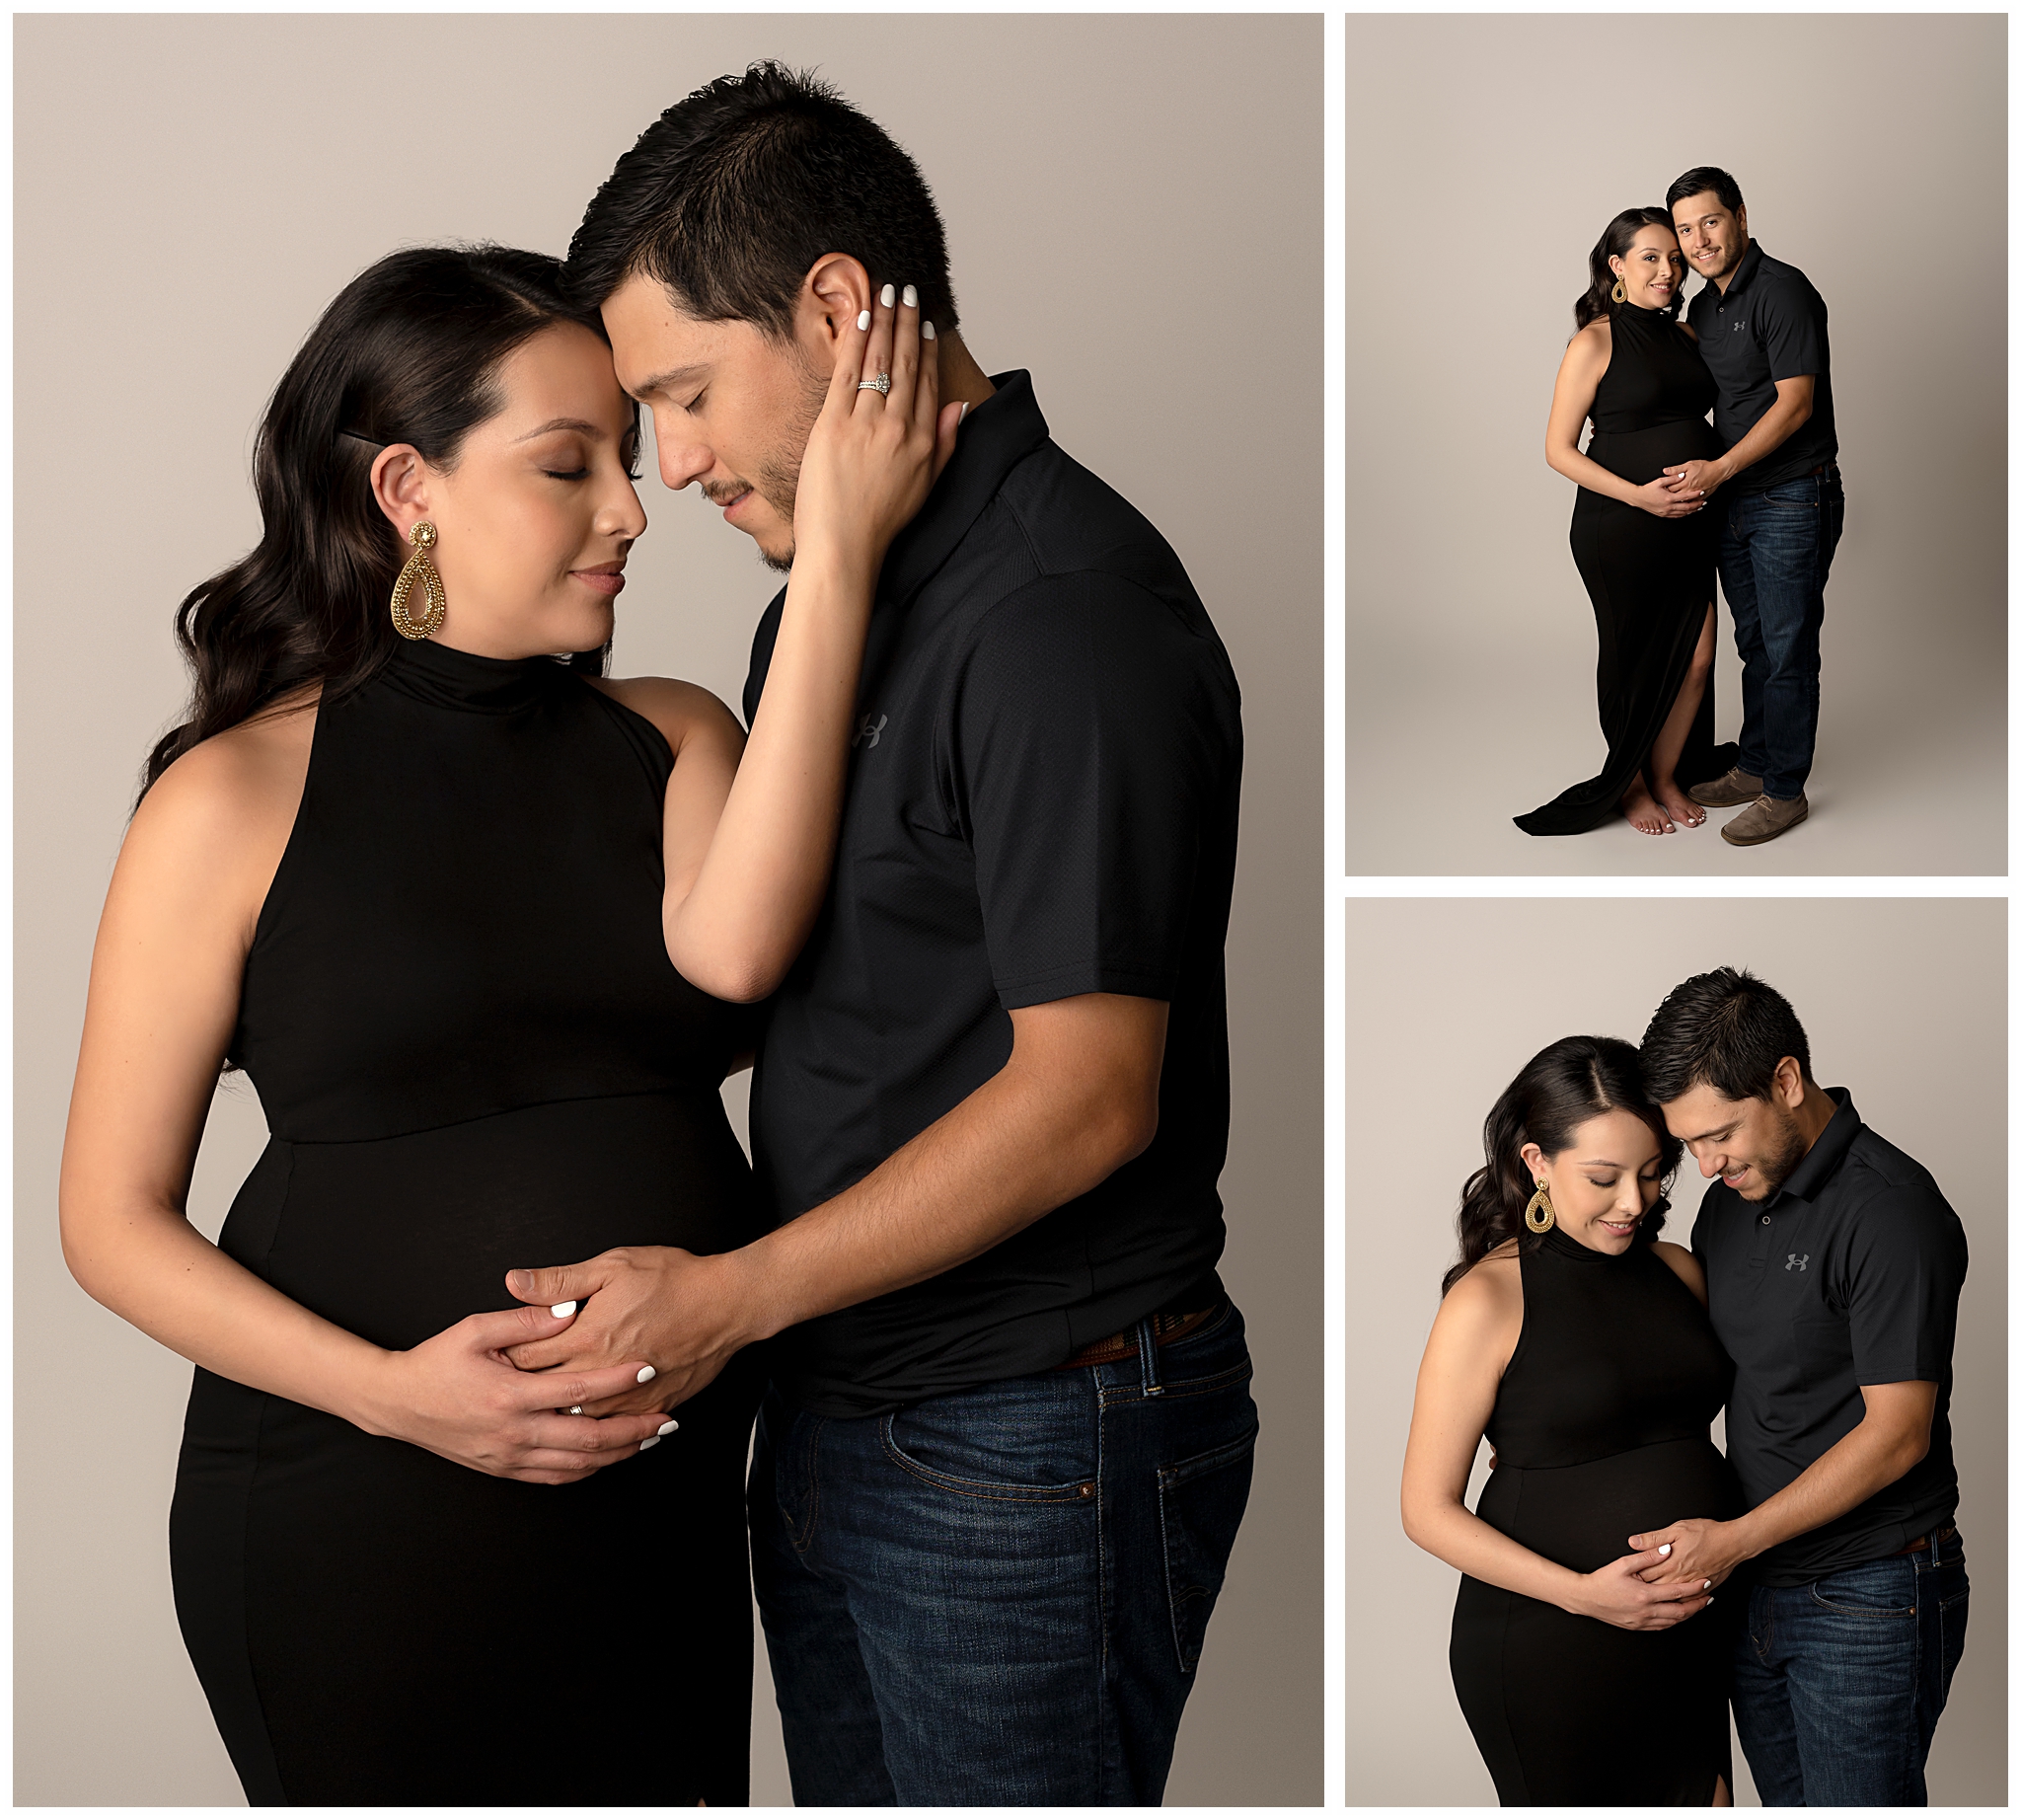 Collage from pregnancy photoshoot including a man and woman holding each other in different poses